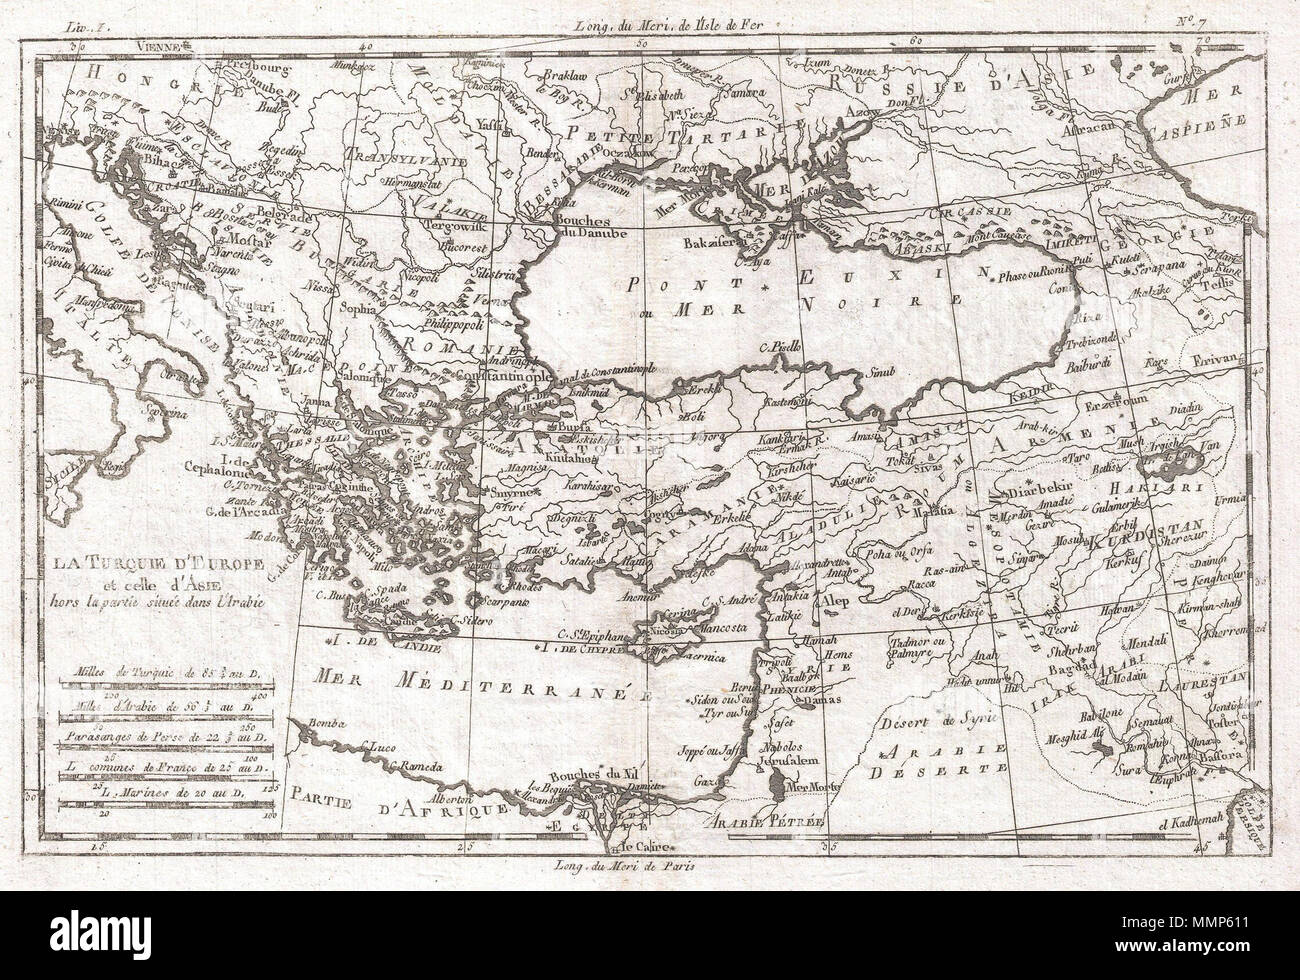 .  English: A fine example of Rigobert Bonne and Guilleme Raynal’s 1780 map of Turkey in Europe and Asia. This map of the Ottoman Empire includes the areas stretching from Italy, Hungary, and modern day Austria in the west, to the Caspian (Caspiene) Sea and Iran in the east, to the Persian Gulf and Egypt's Nile Delta in the south. Includes modern day Greece and Turkey in their entirety (including the area formerly known as Kurdistan), as well as Georgia (Georgie), Armenia, Jordan, Israel, Palestine, Iran, Iraq, and Syria. Denotes Jerusalem, Baghdad (Bagdad), Constantinople (the capital of the  Stock Photo